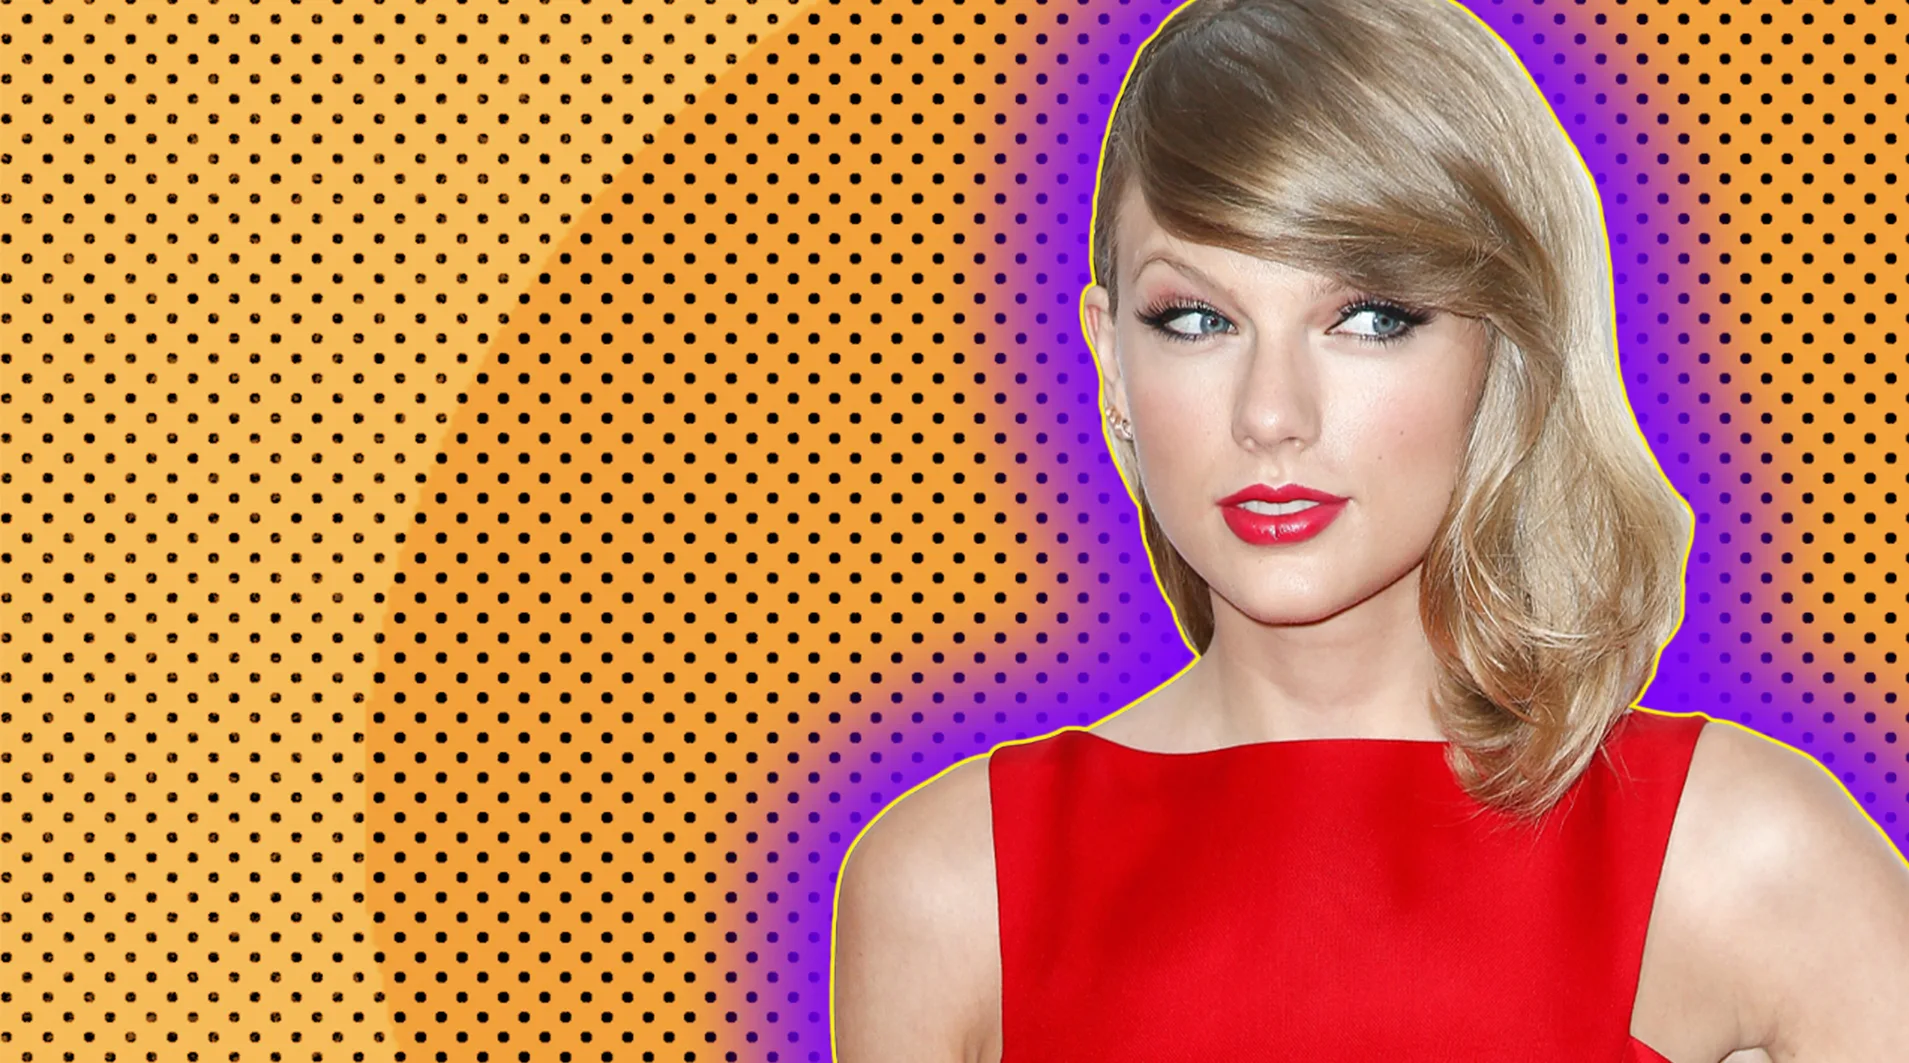 Taylor Swift wearing red dress and red lips, outlined by purple halo effect on orange background dotted with black.